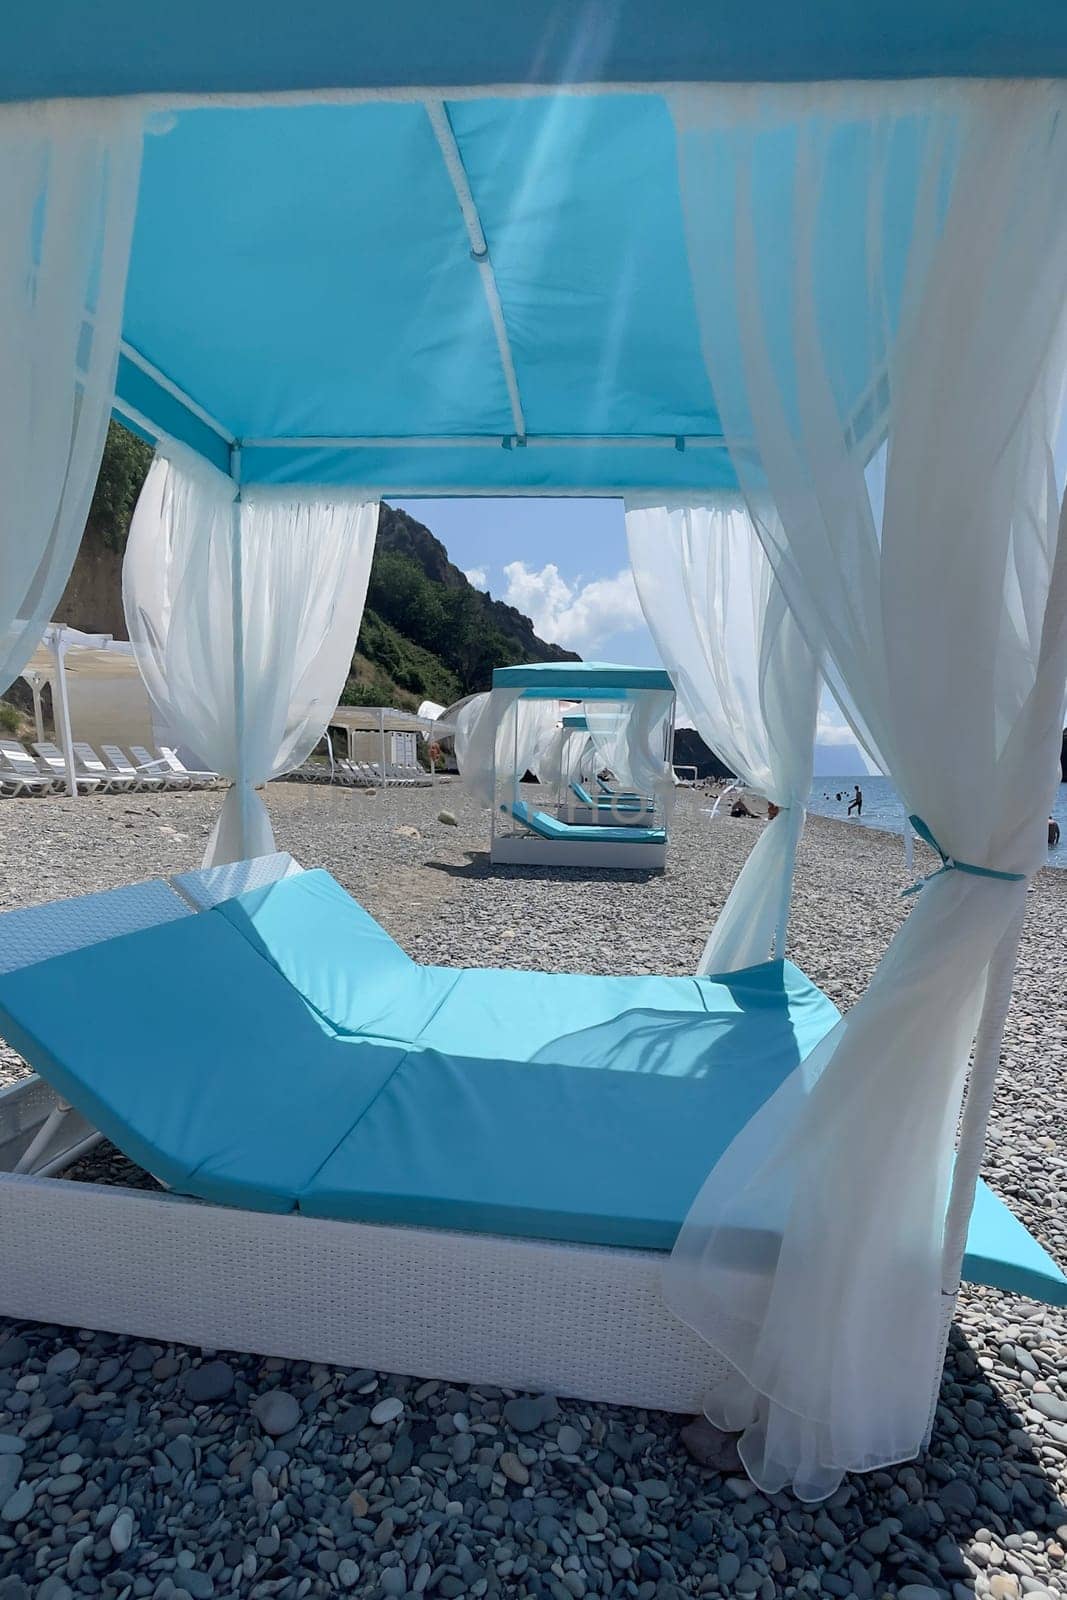 A blue and white beach umbrella with white curtains is set up on a beach by Matiunina